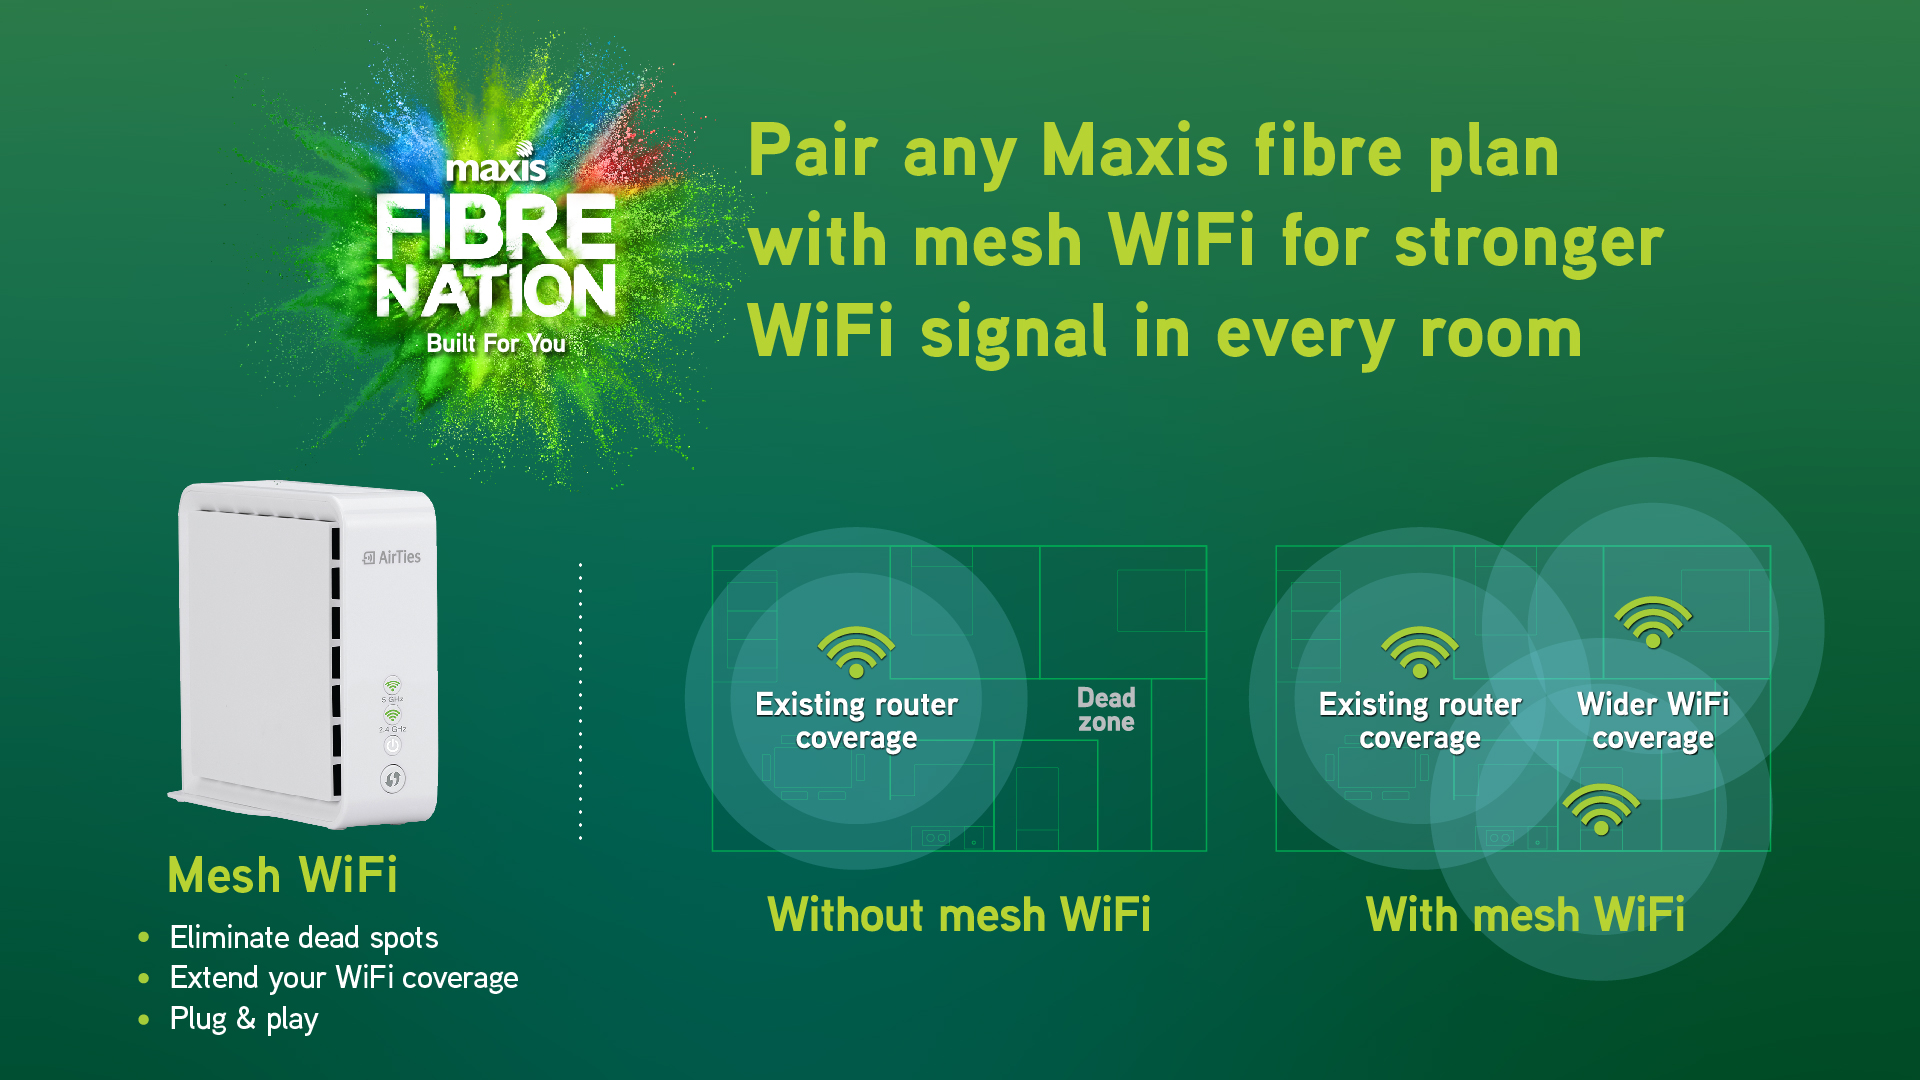 Maxis 5g coverage